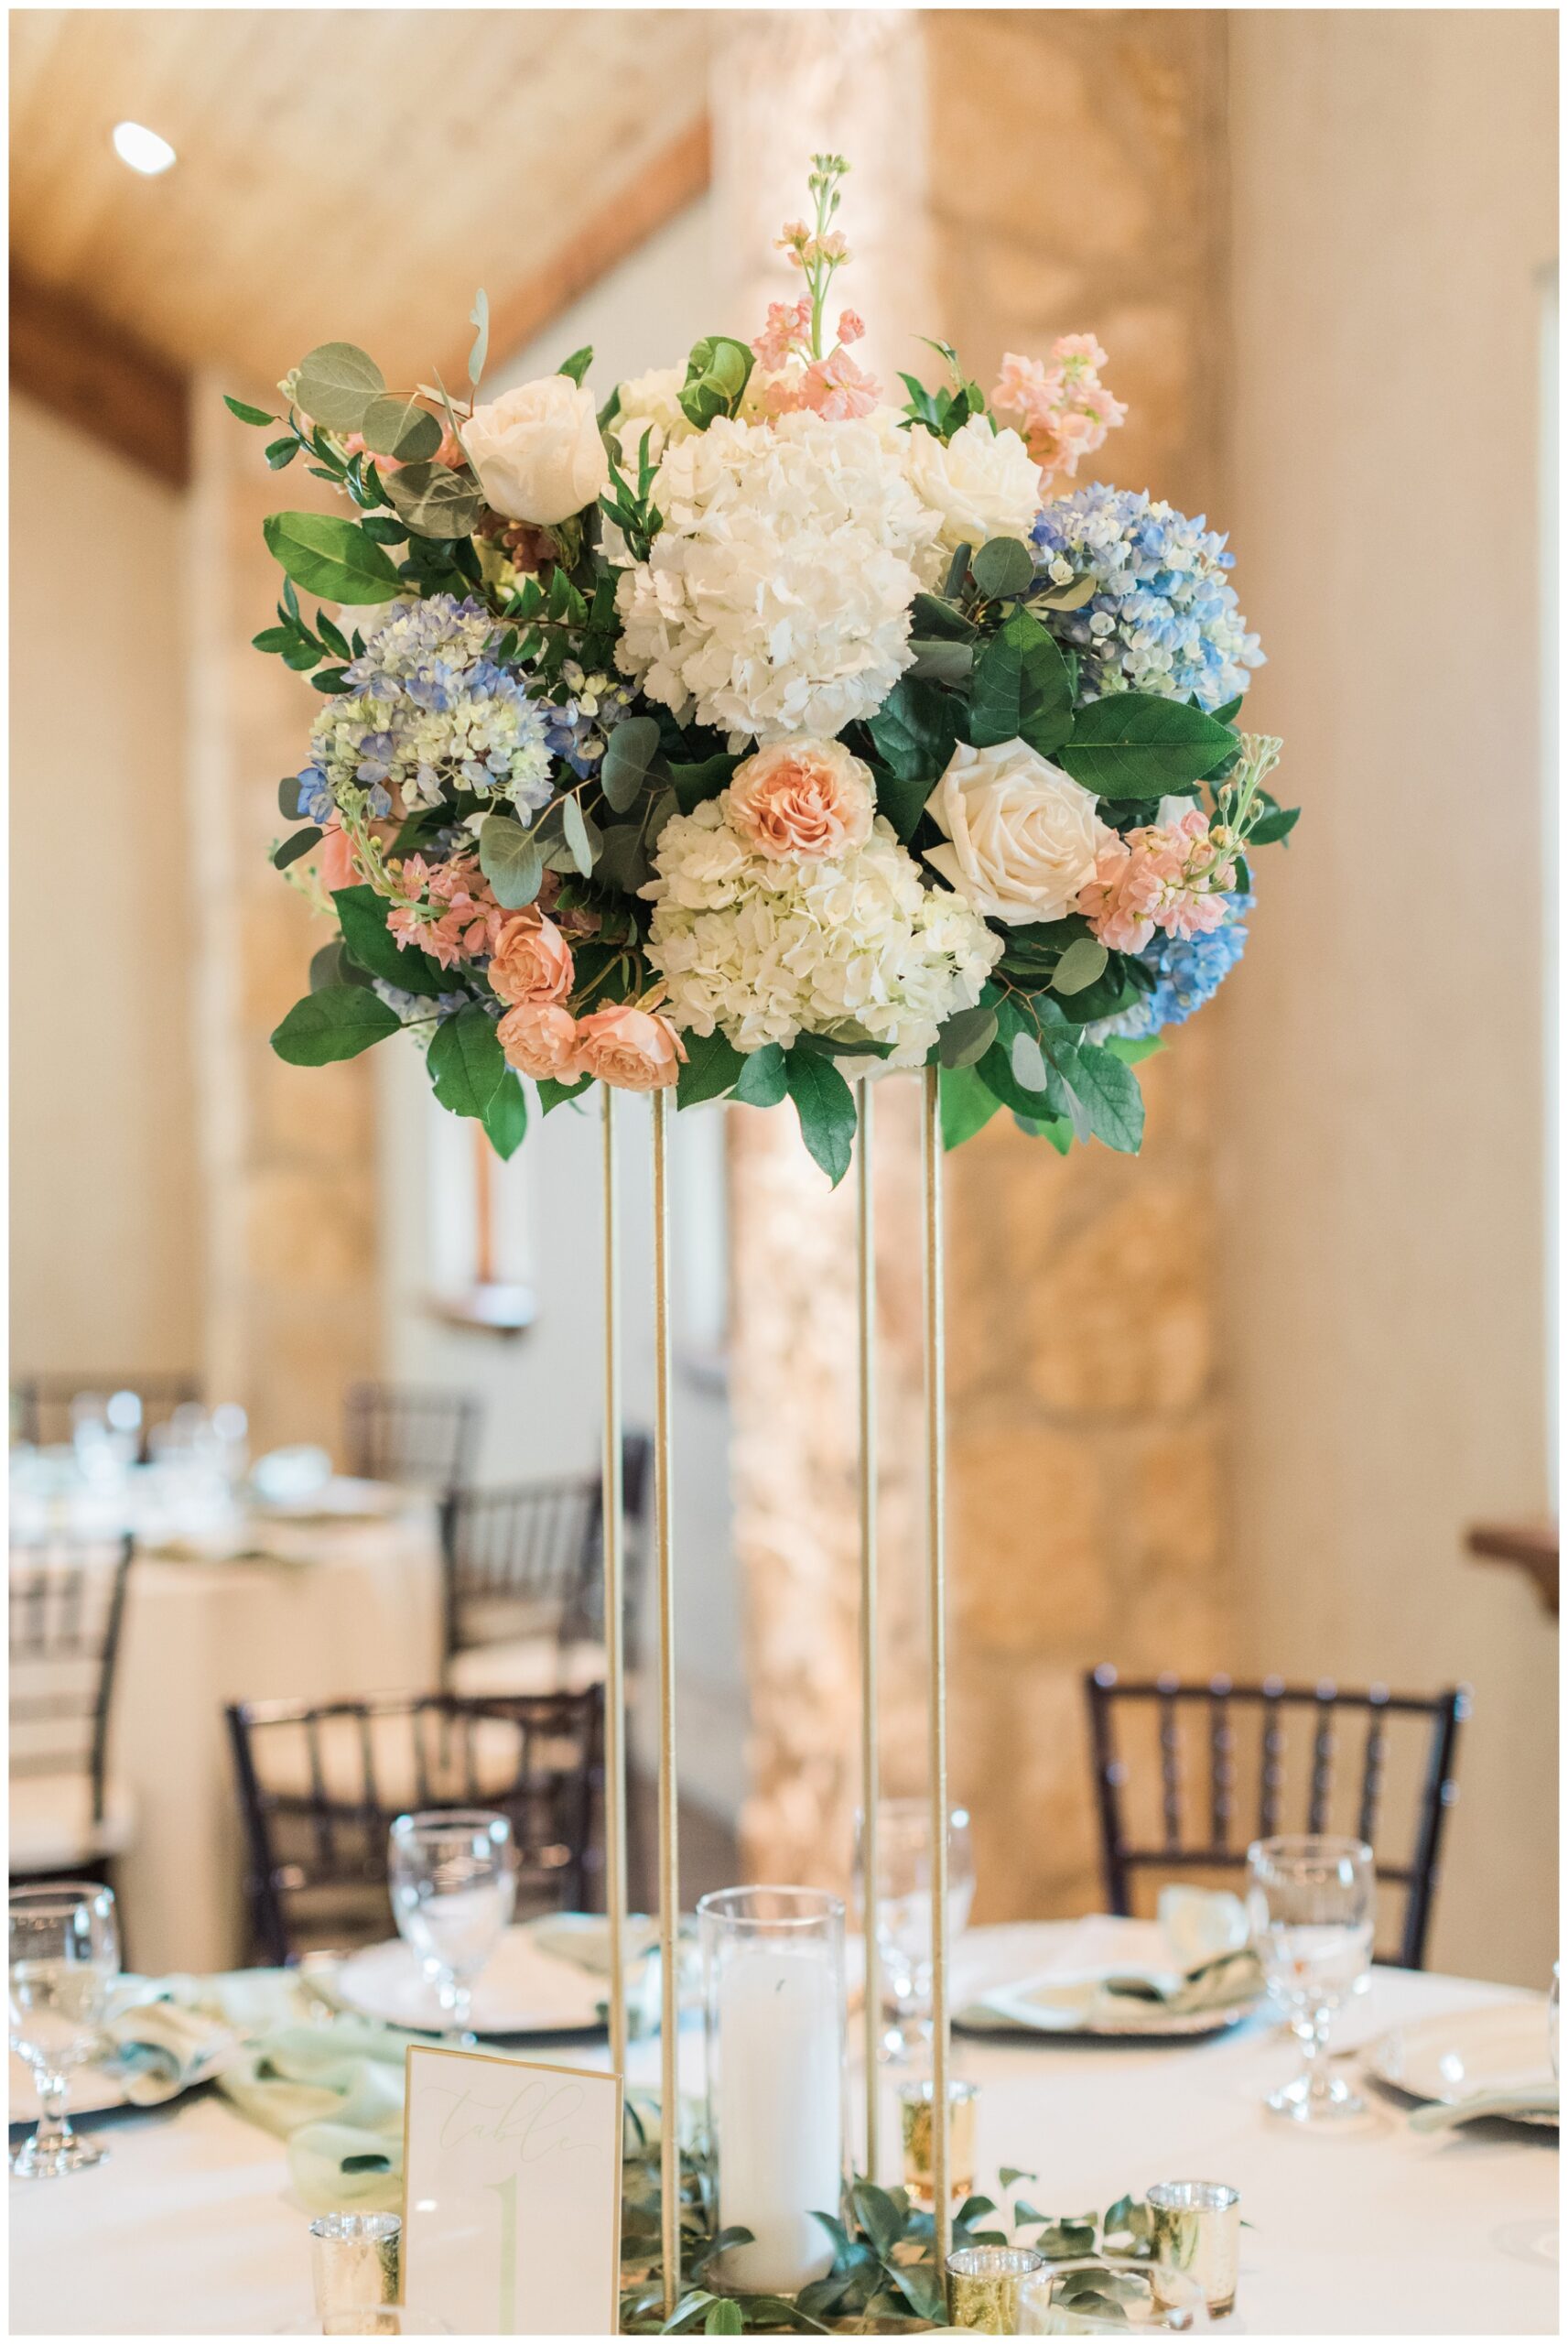 Tall floral centerpiece with blue and white hydrangeas and blush roses at a wedding